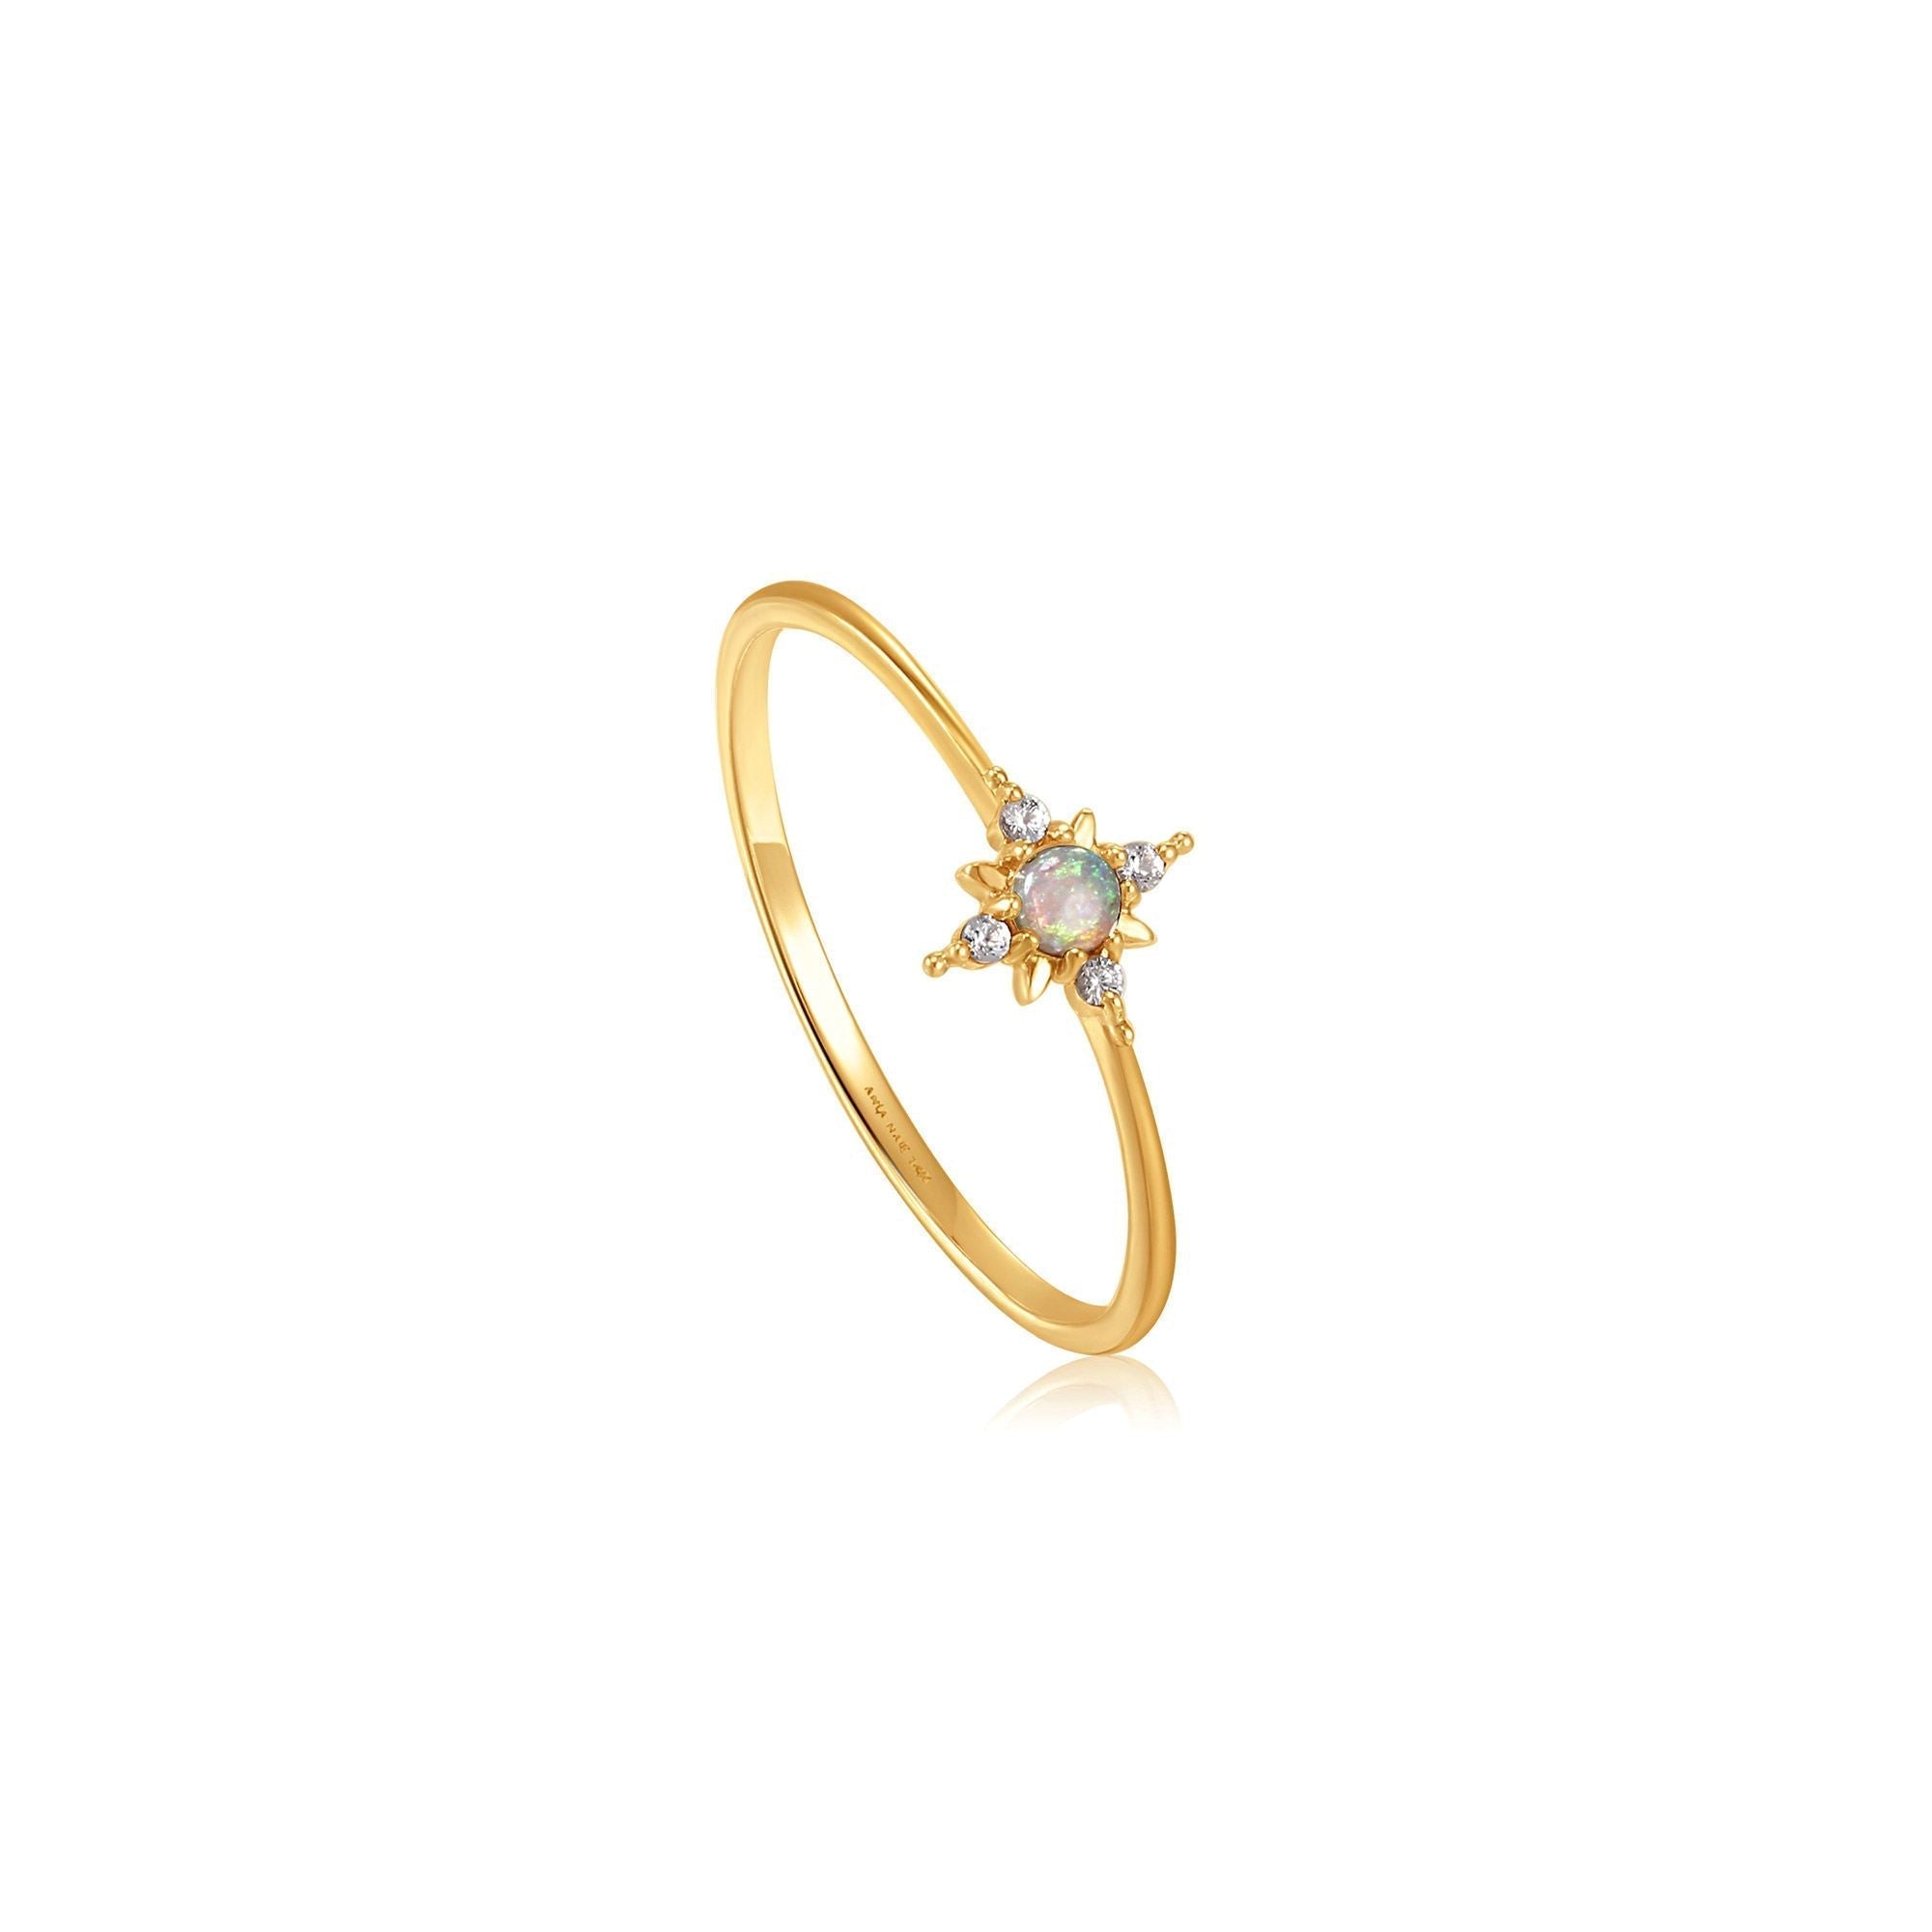 Ania Haie 14kt Gold Opal and White Sapphire Star Ring